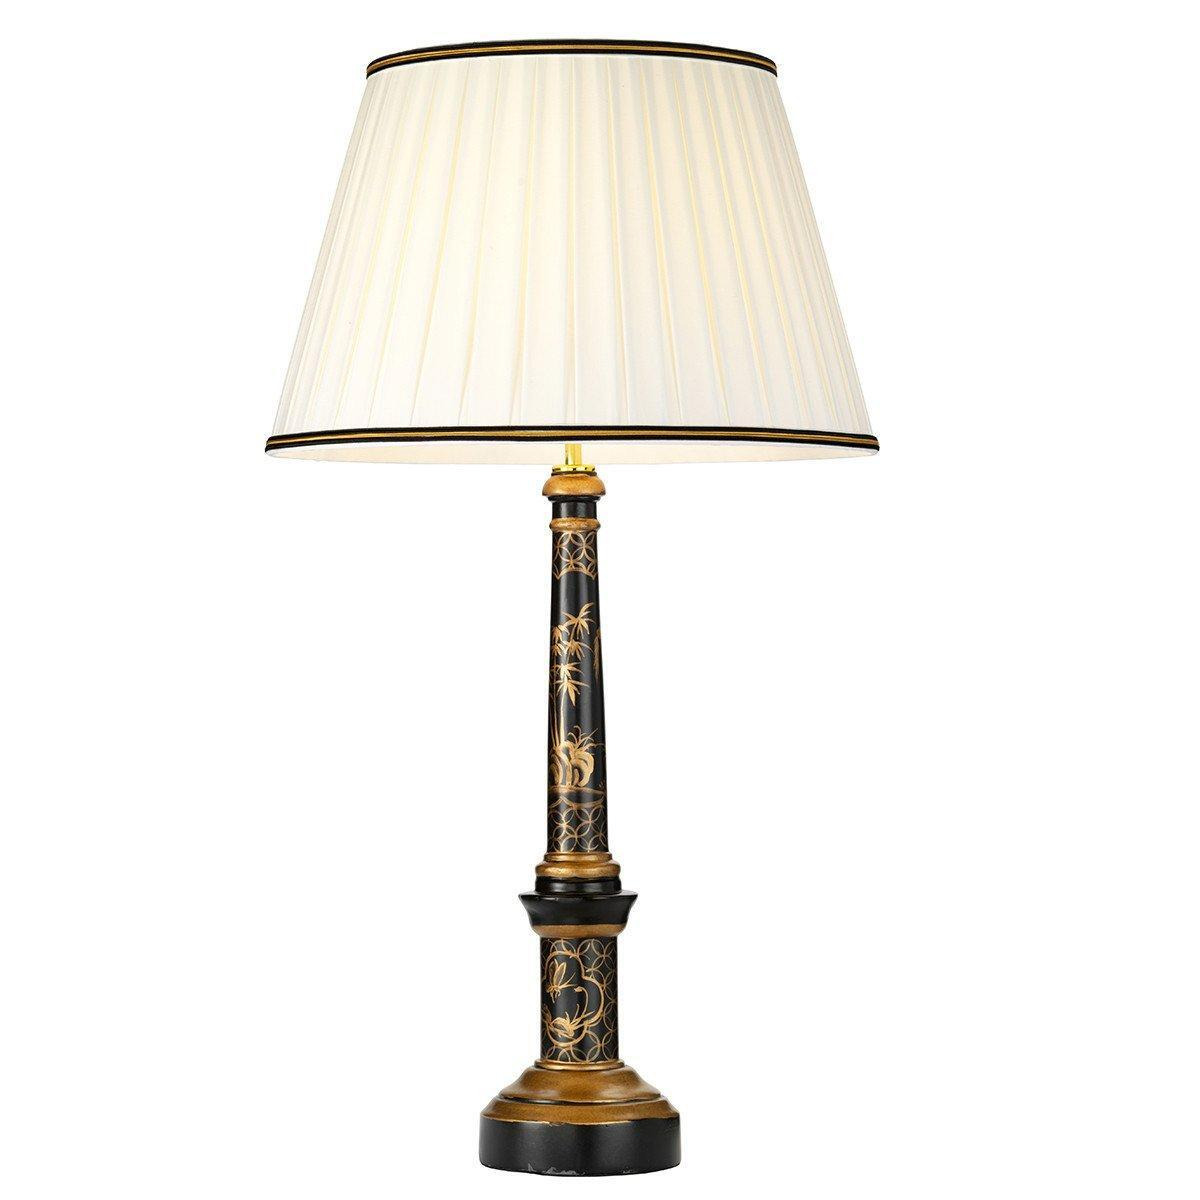 Strasbourg Black Decorated Wood Table Lamp Tall Empire Shade - image 1